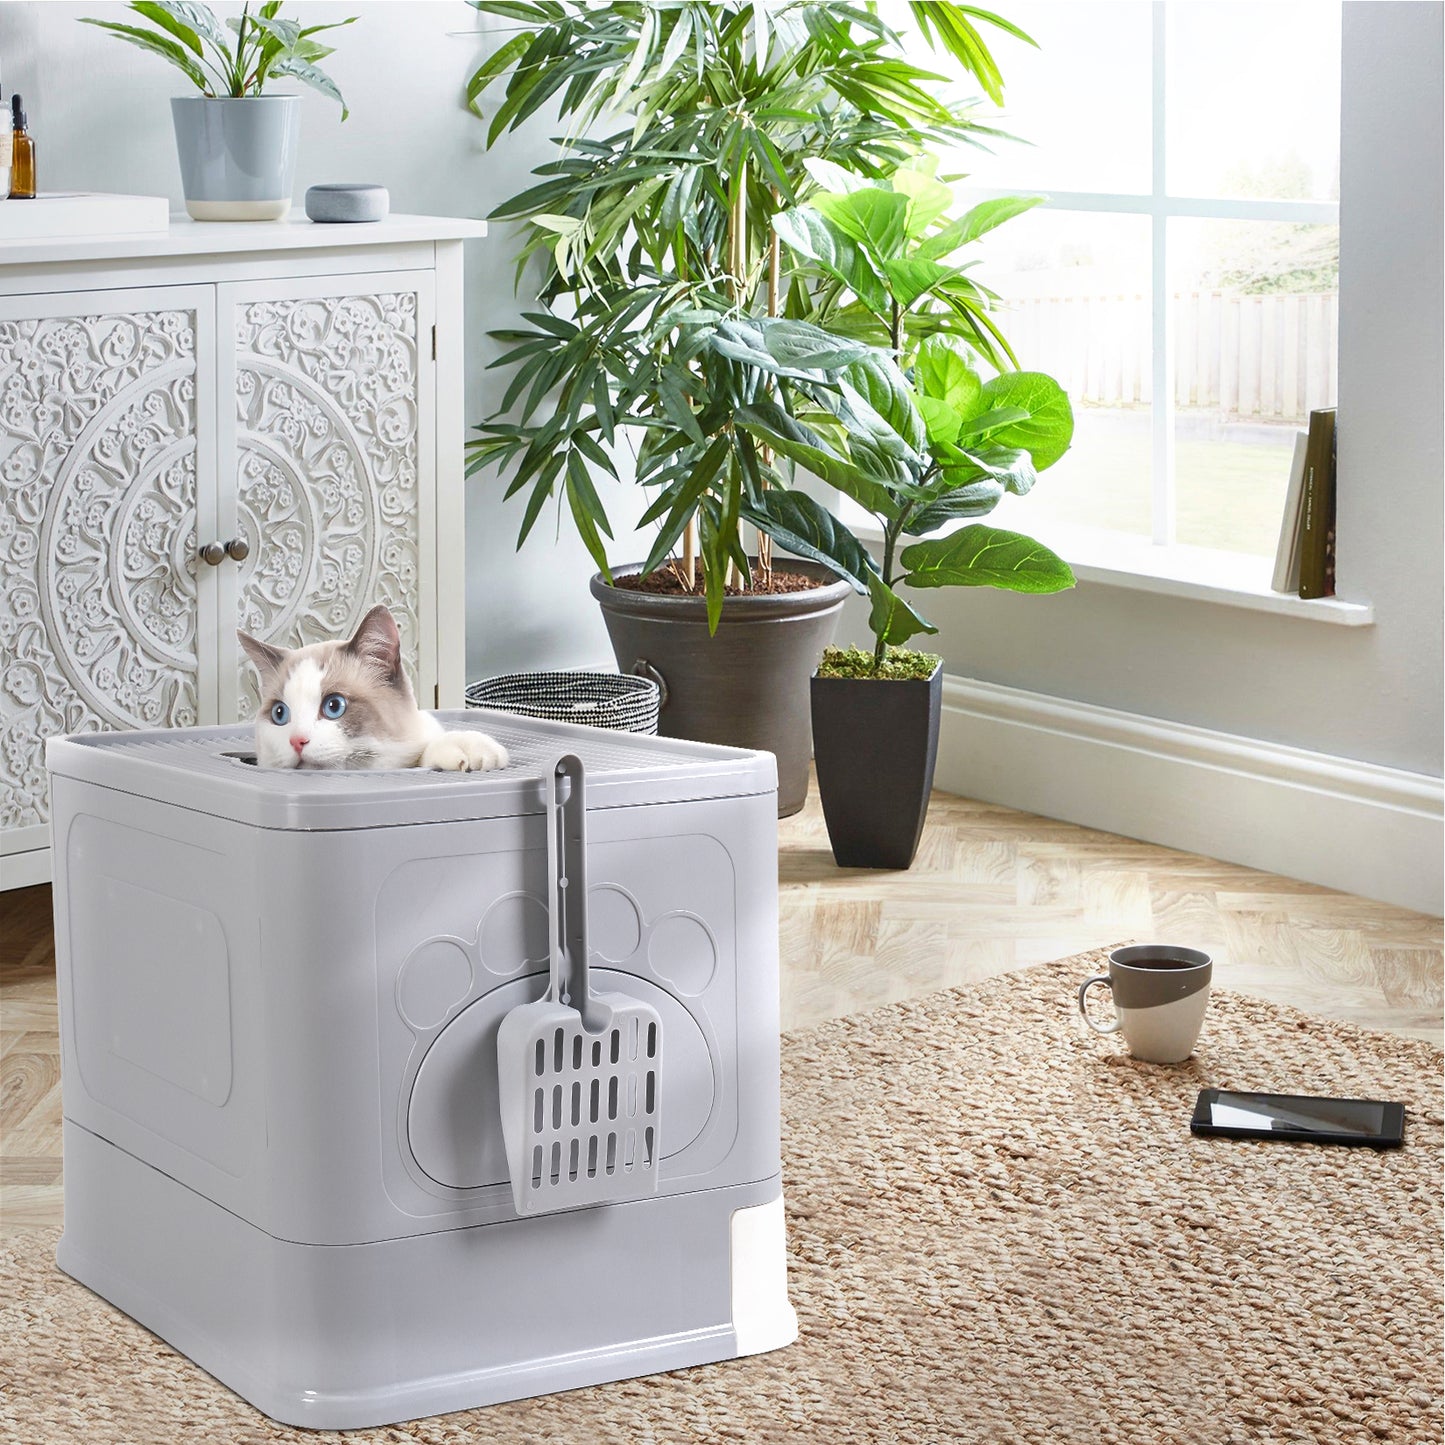 Enclosed Cat Litter Box Front Entry & Top Exit Toilet Boxes Litter Tray Drawer With Massager Litter Scoop for Kittens, Detachable Design